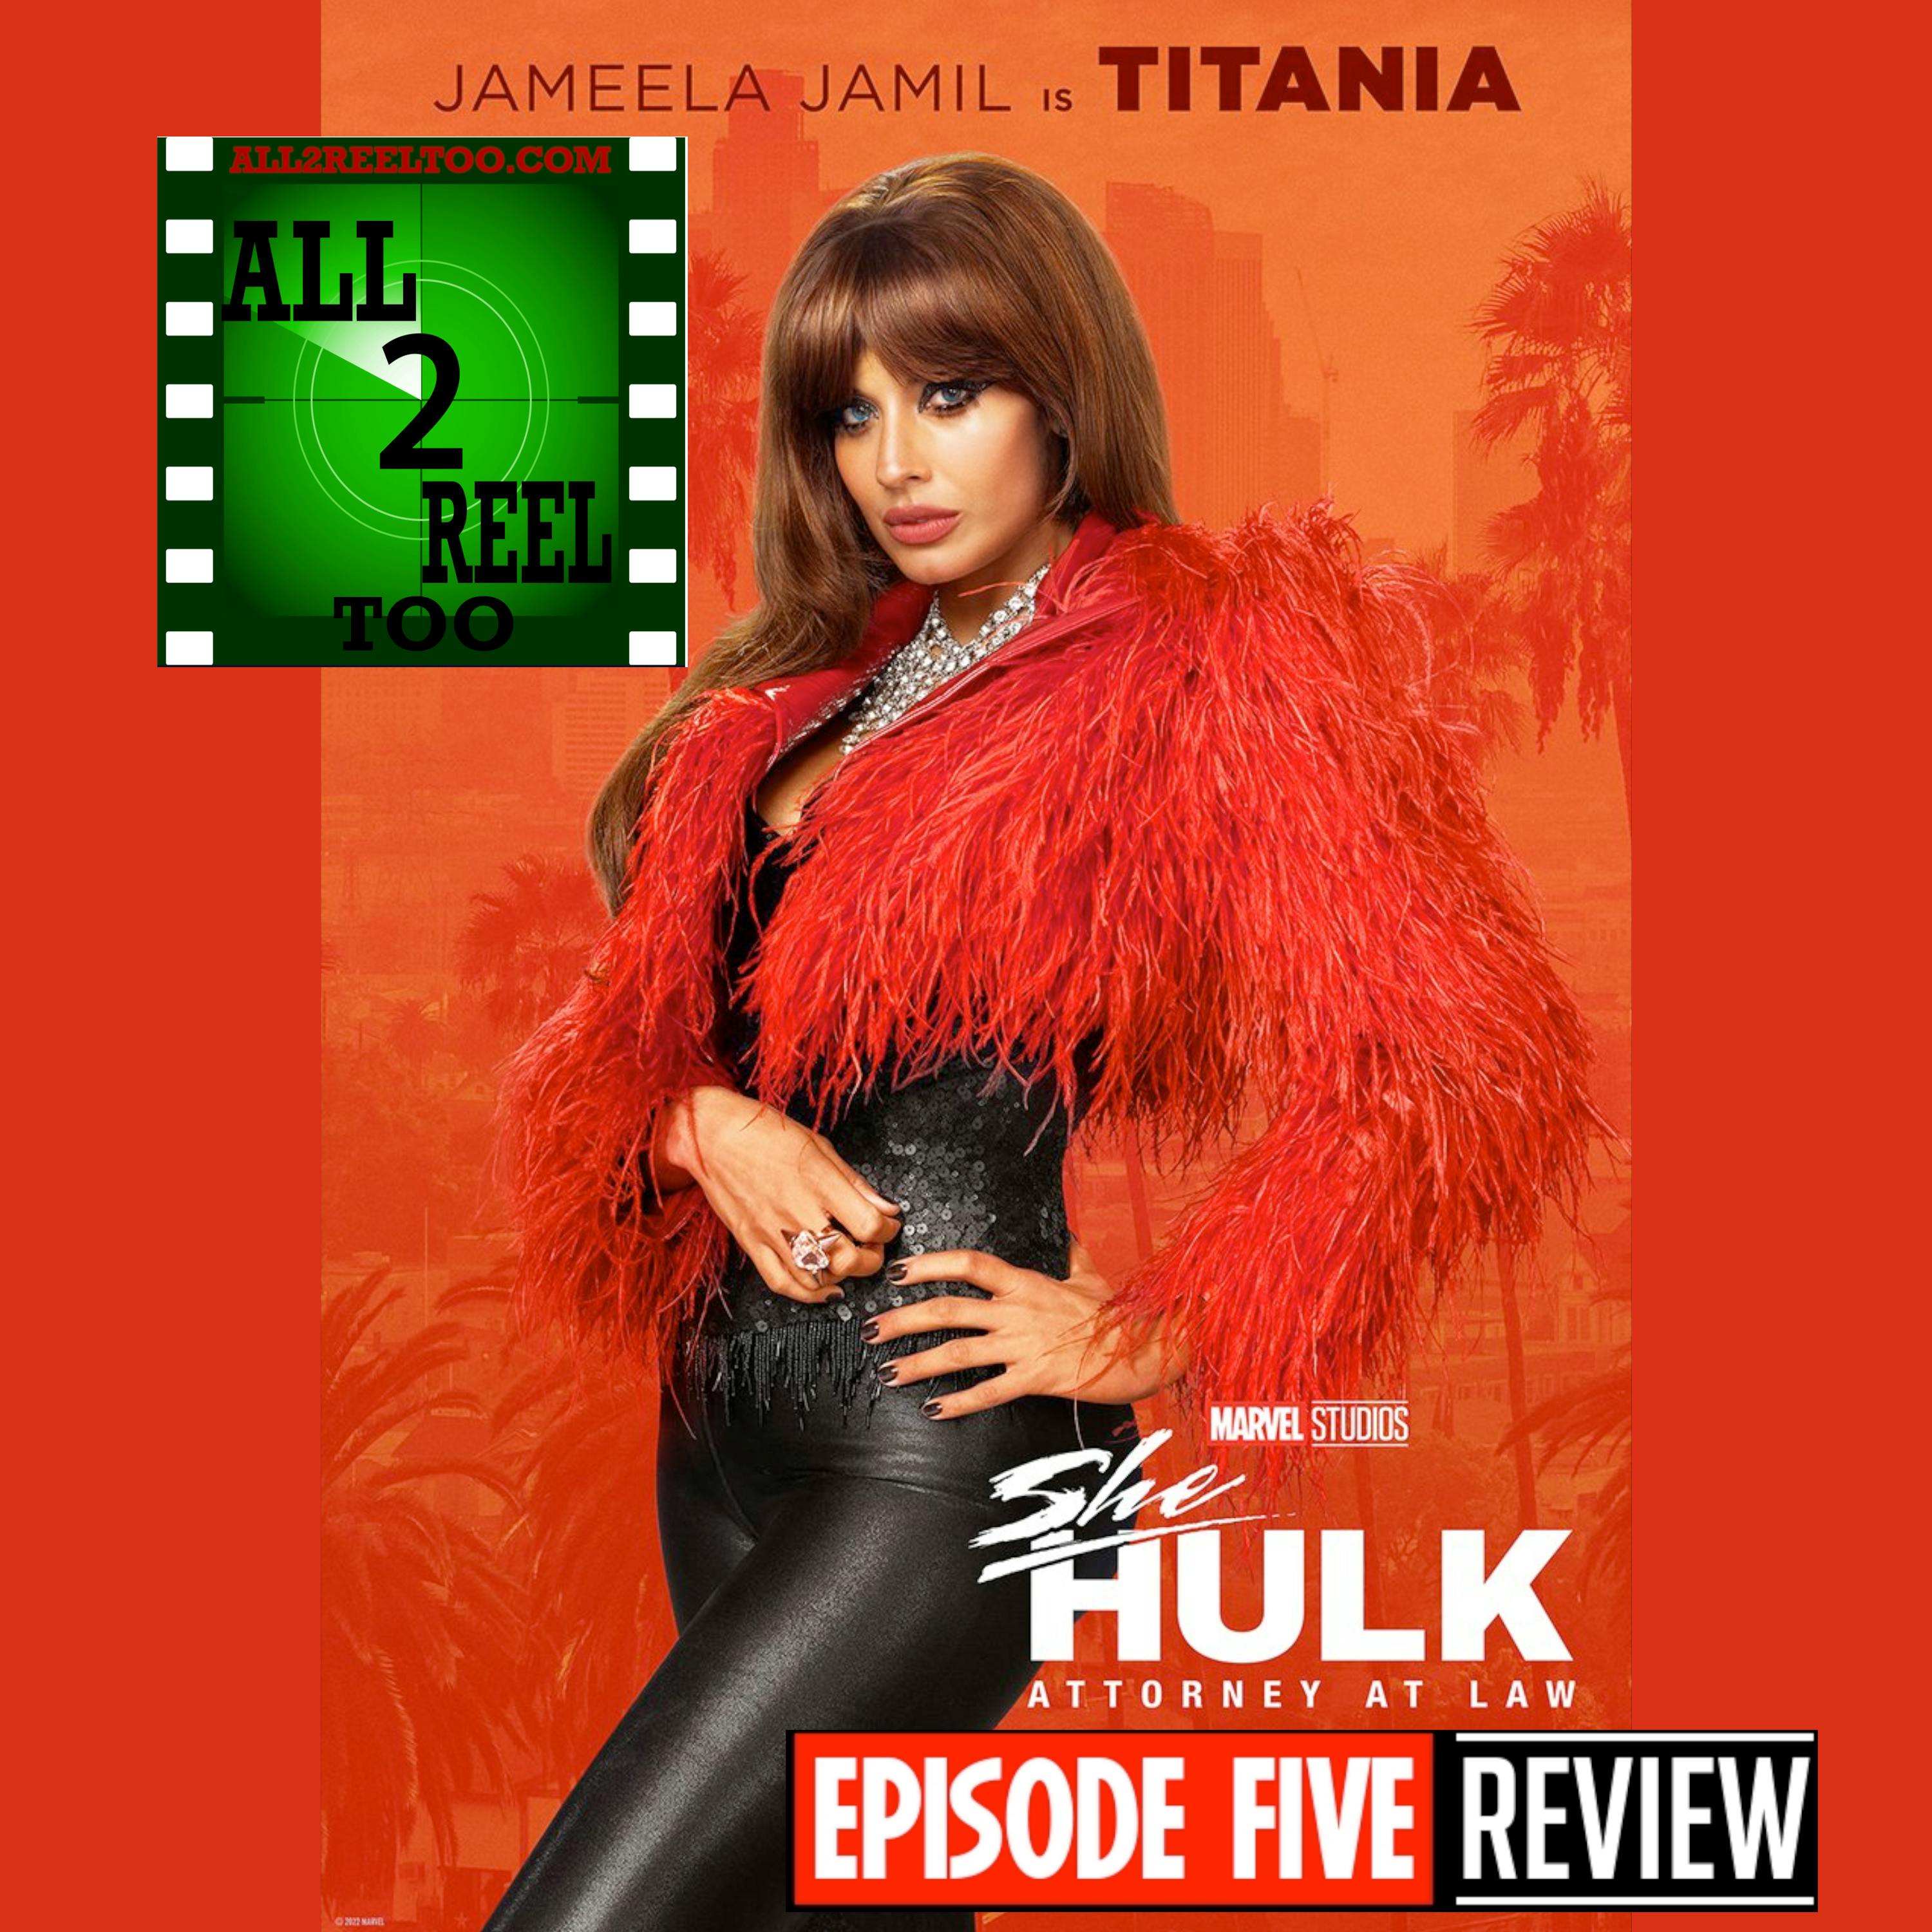 She-Hulk: Attorney at Law - EPISODE 5 REVIEW